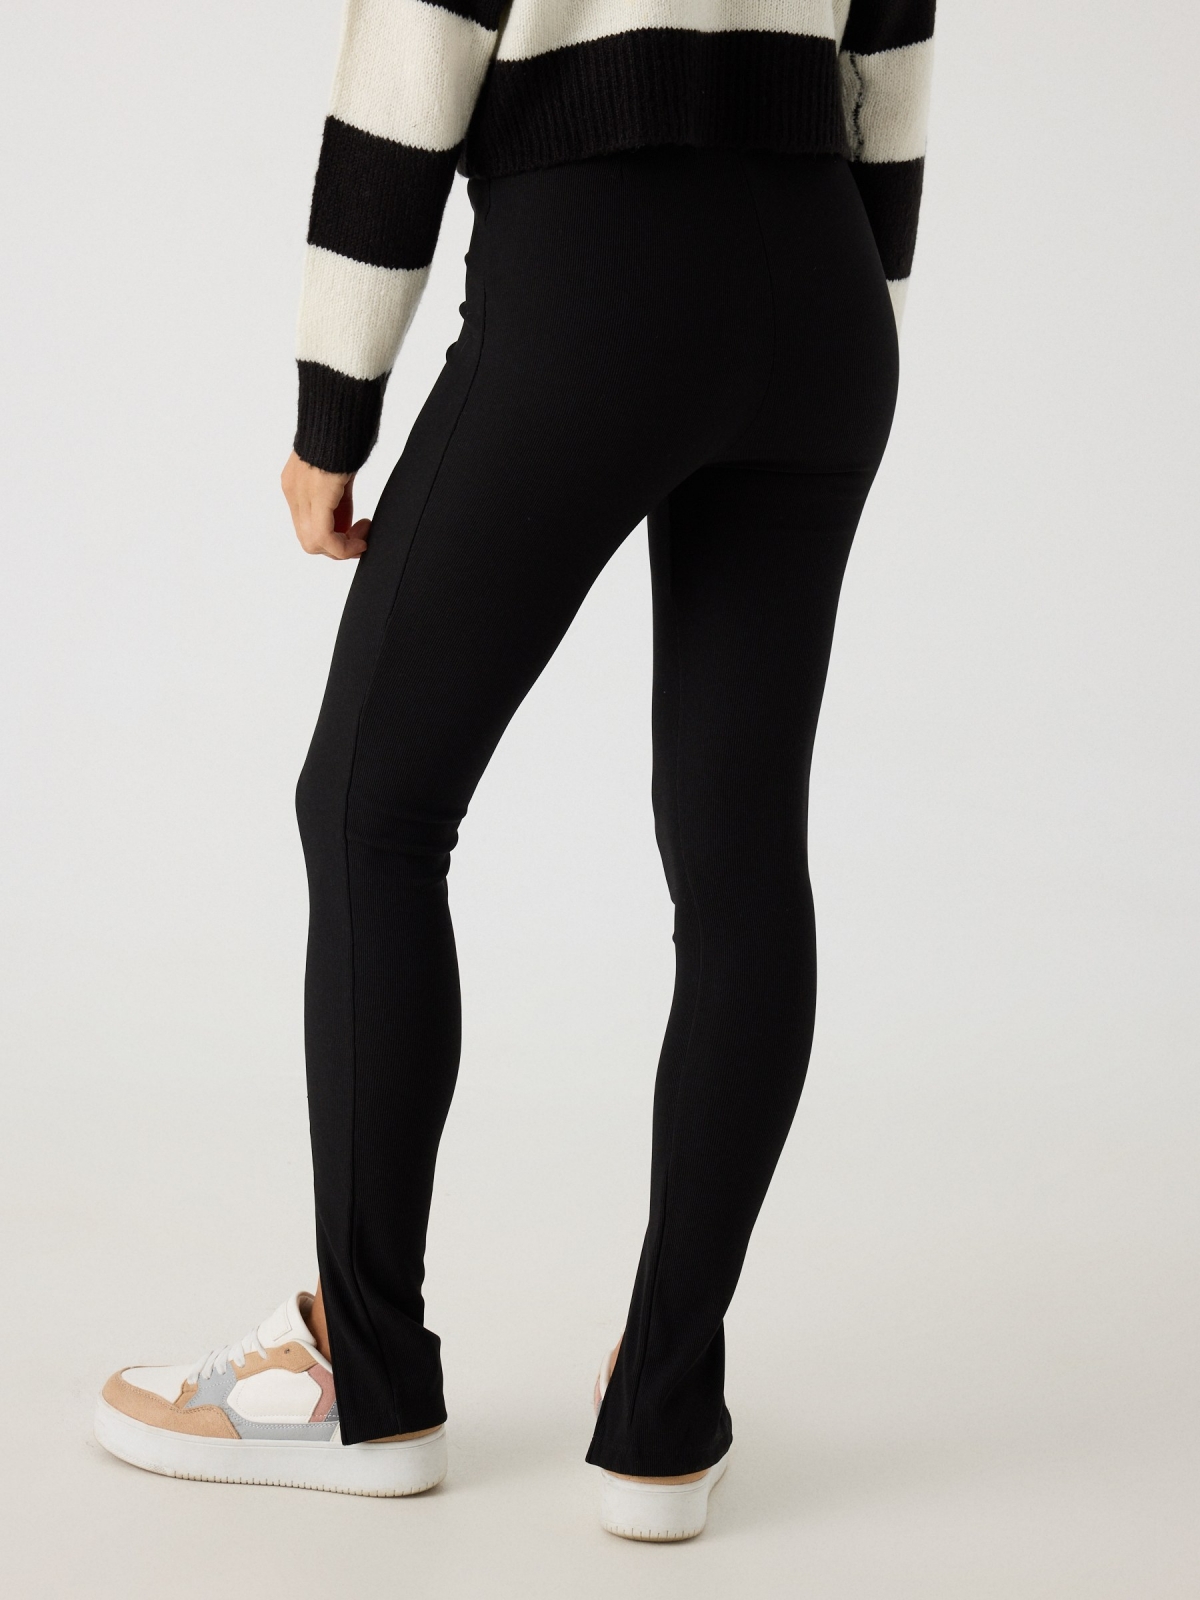 High waisted ottoman leggings black middle back view